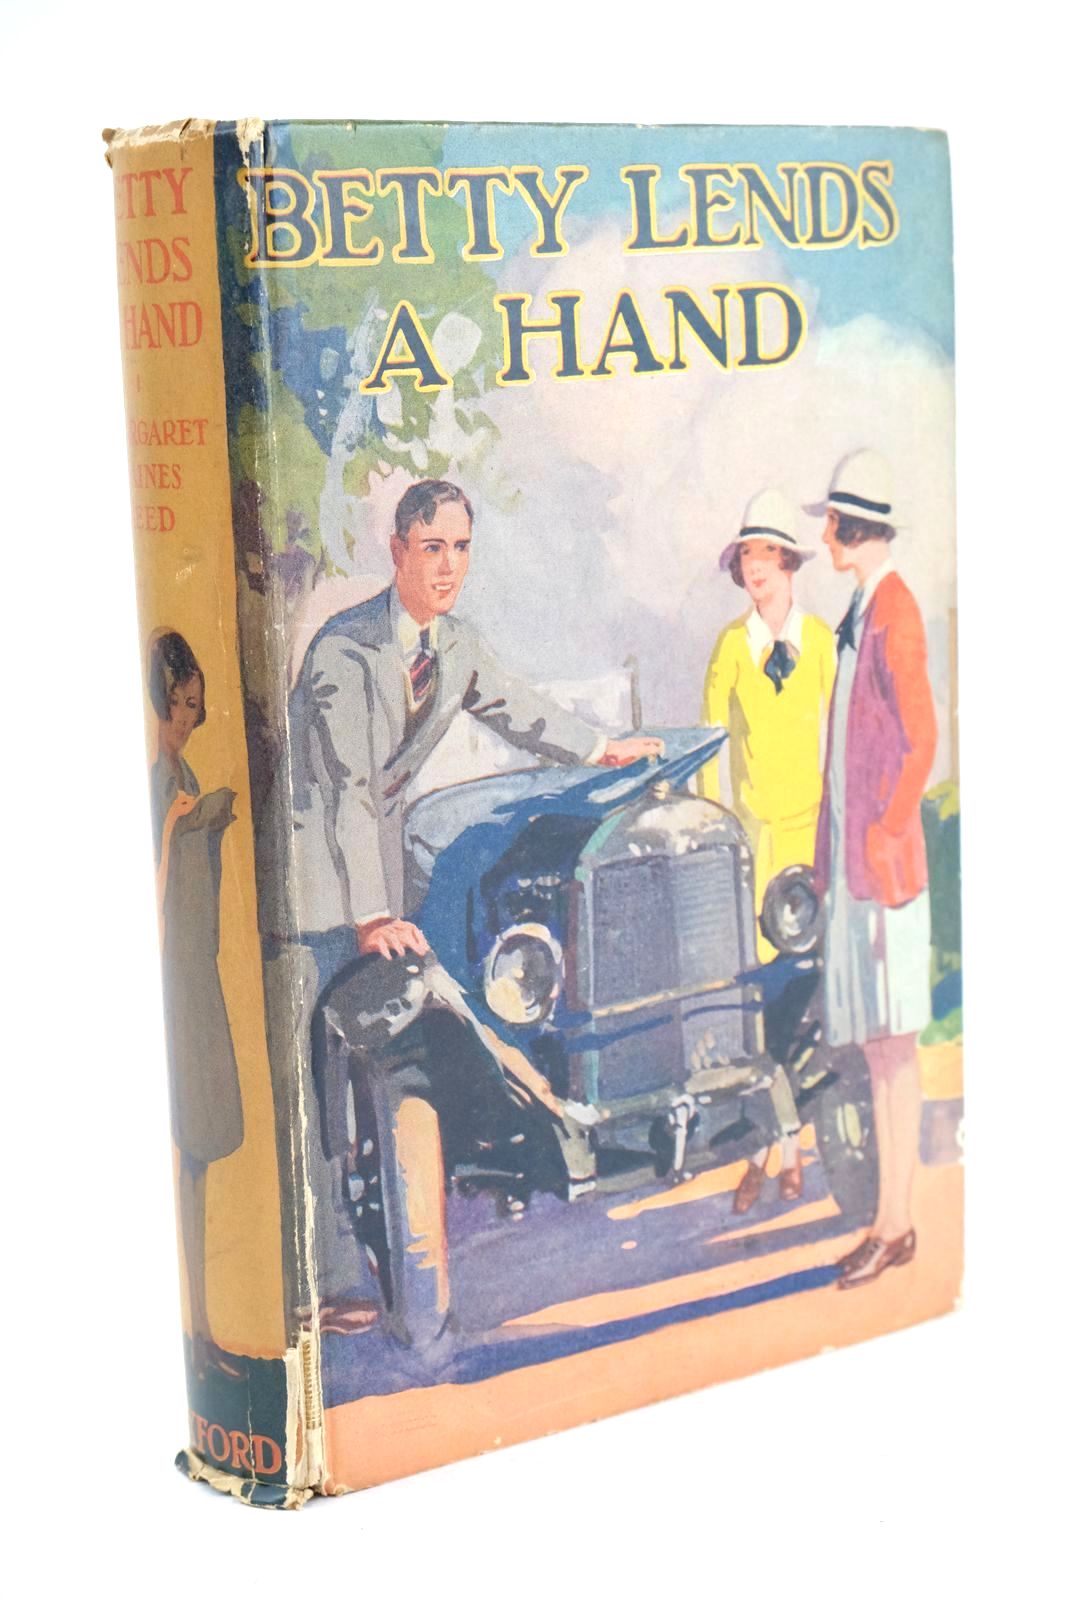 Photo of BETTY LENDS A HAND written by Reed, Margaret Baines published by Oxford University Press, Humphrey Milford (STOCK CODE: 1325233)  for sale by Stella & Rose's Books